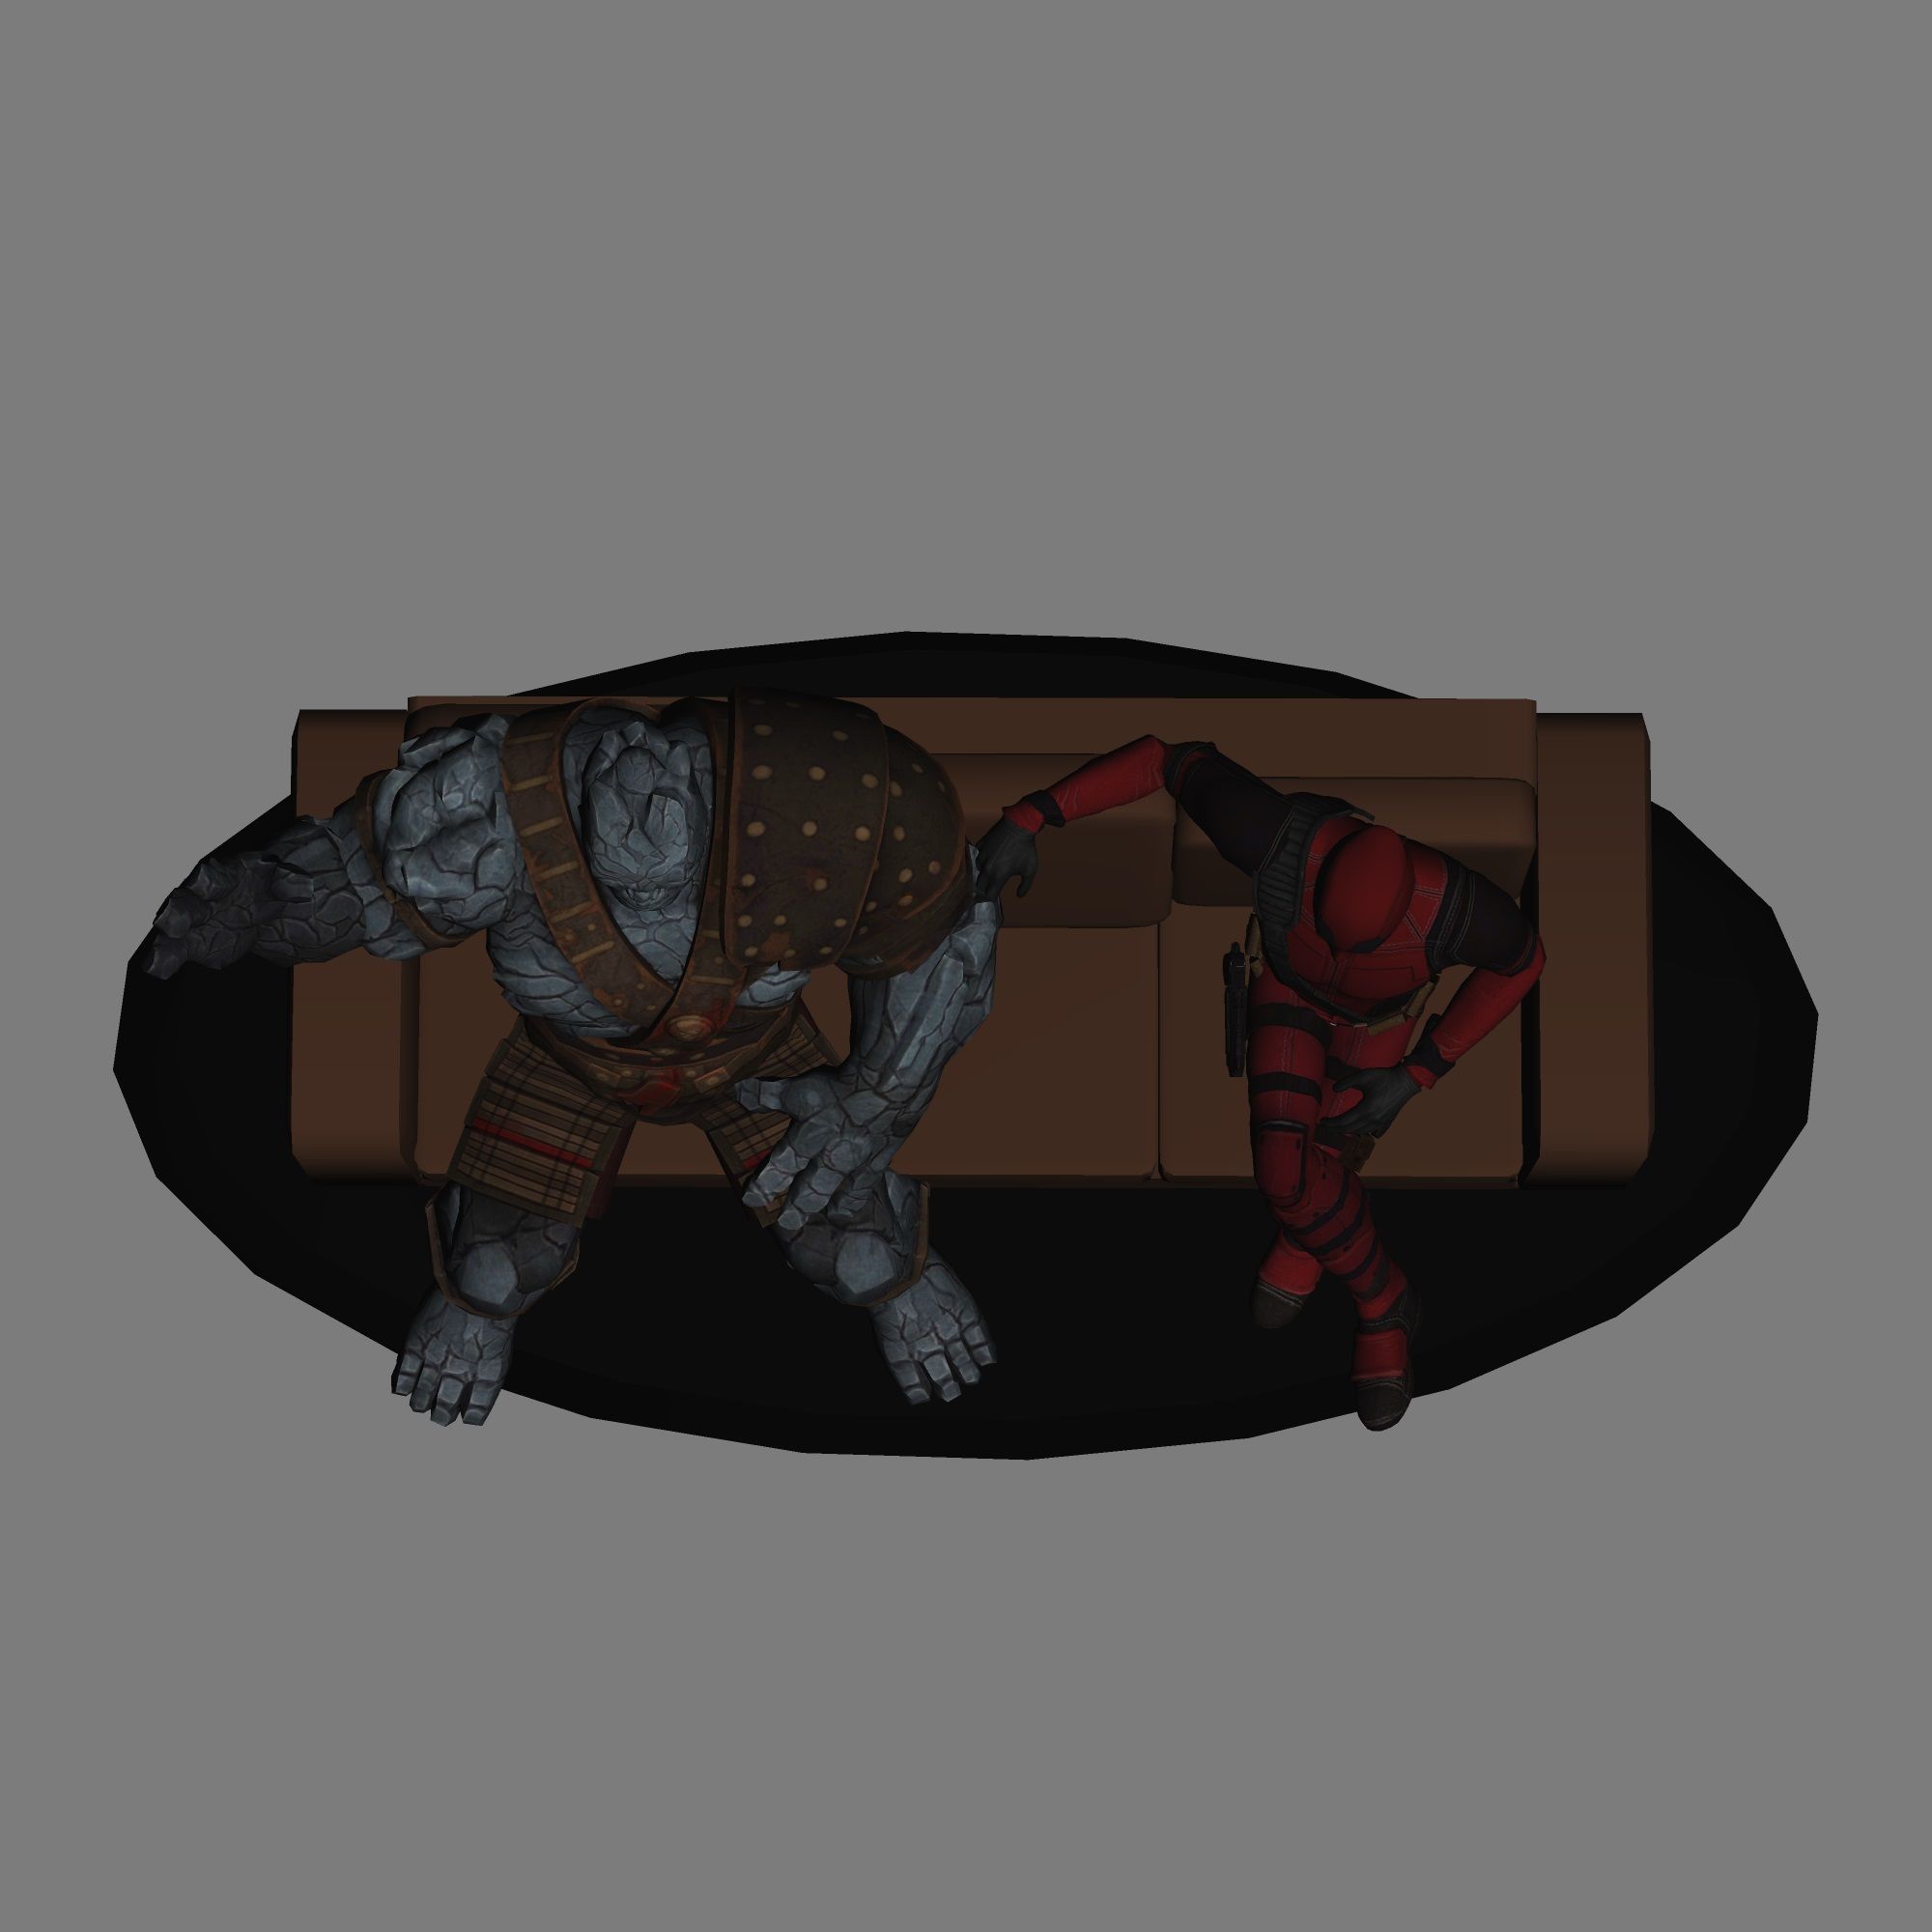 04.jpg Download STL file Deadpool and Korg CROSSOVER in the sofa - low poly 3d print • 3D printing template, TonMcu